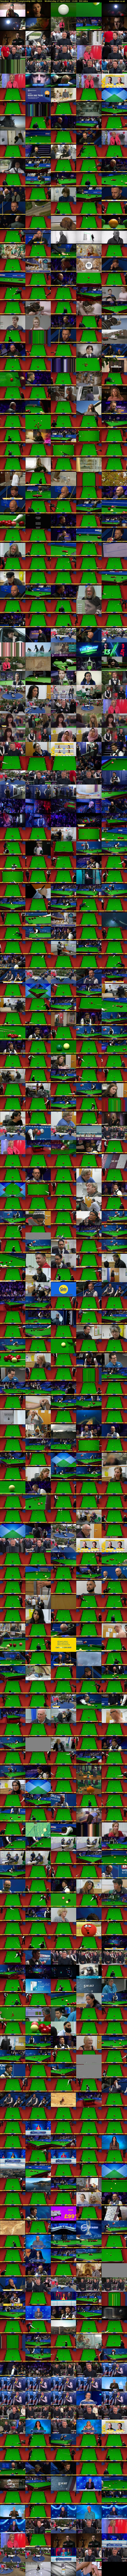 Snooker: World Championship (BBC TWO) Wednesday 27 April 2022 13:00 - 18:00